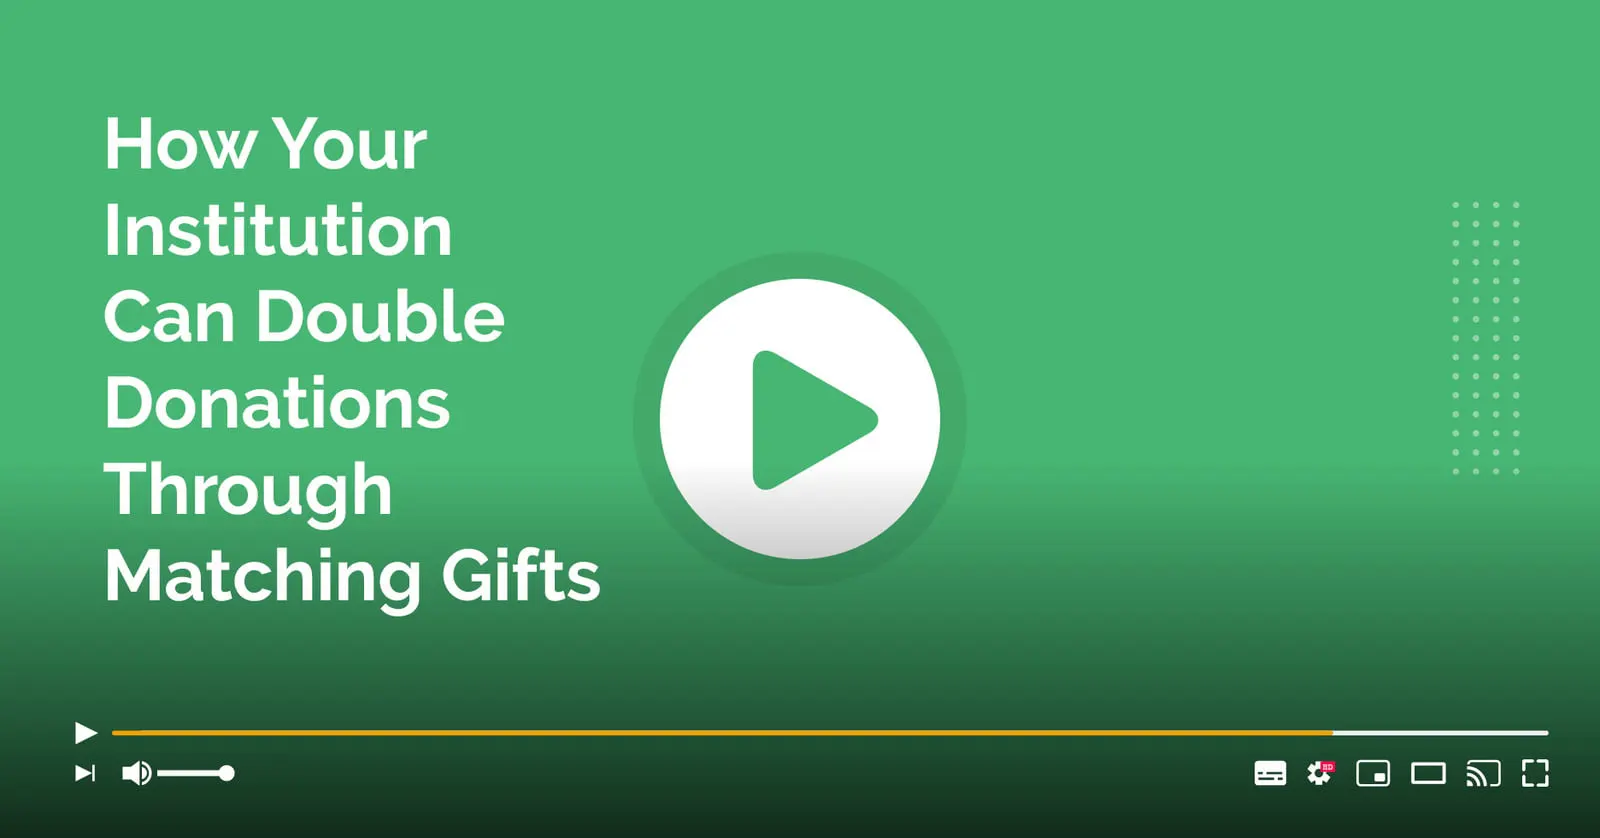 How Your Institution Can Double Donations Through Matching Gifts